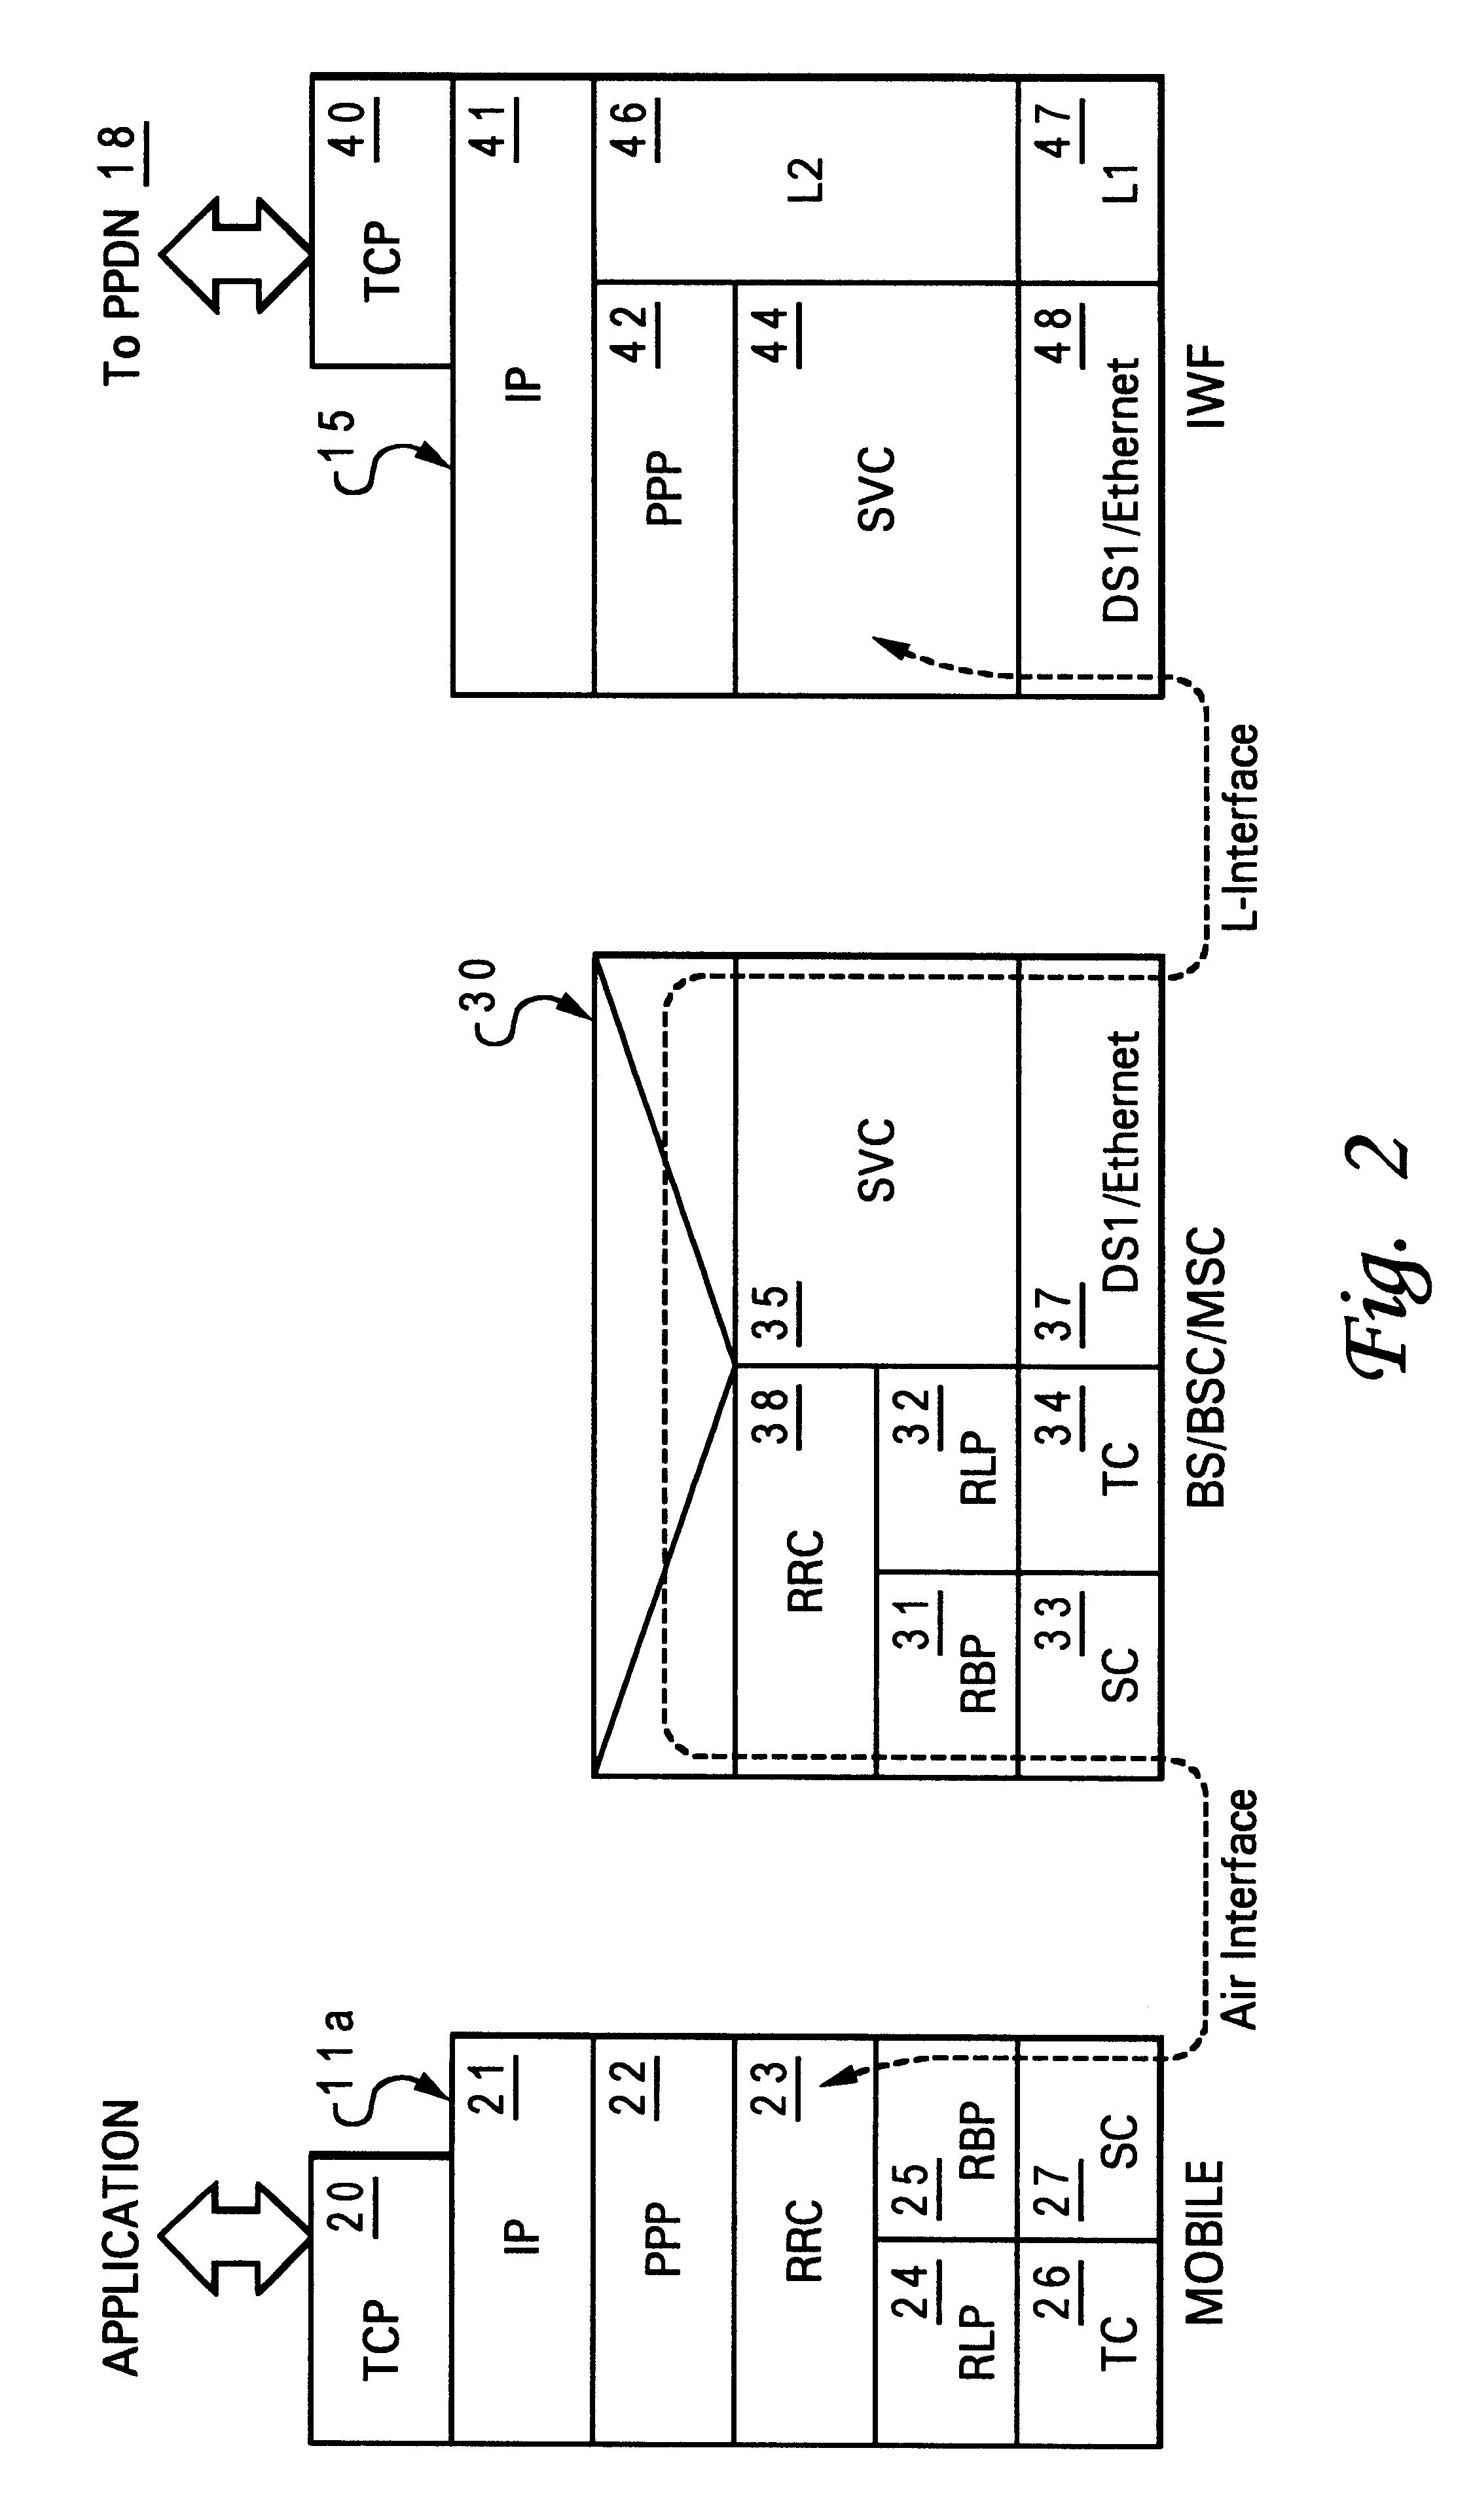 Method and system for limiting data packet transmission within a digital mobile telephone communication network by discarding unsuccessfully transmitted radio link protocol frames